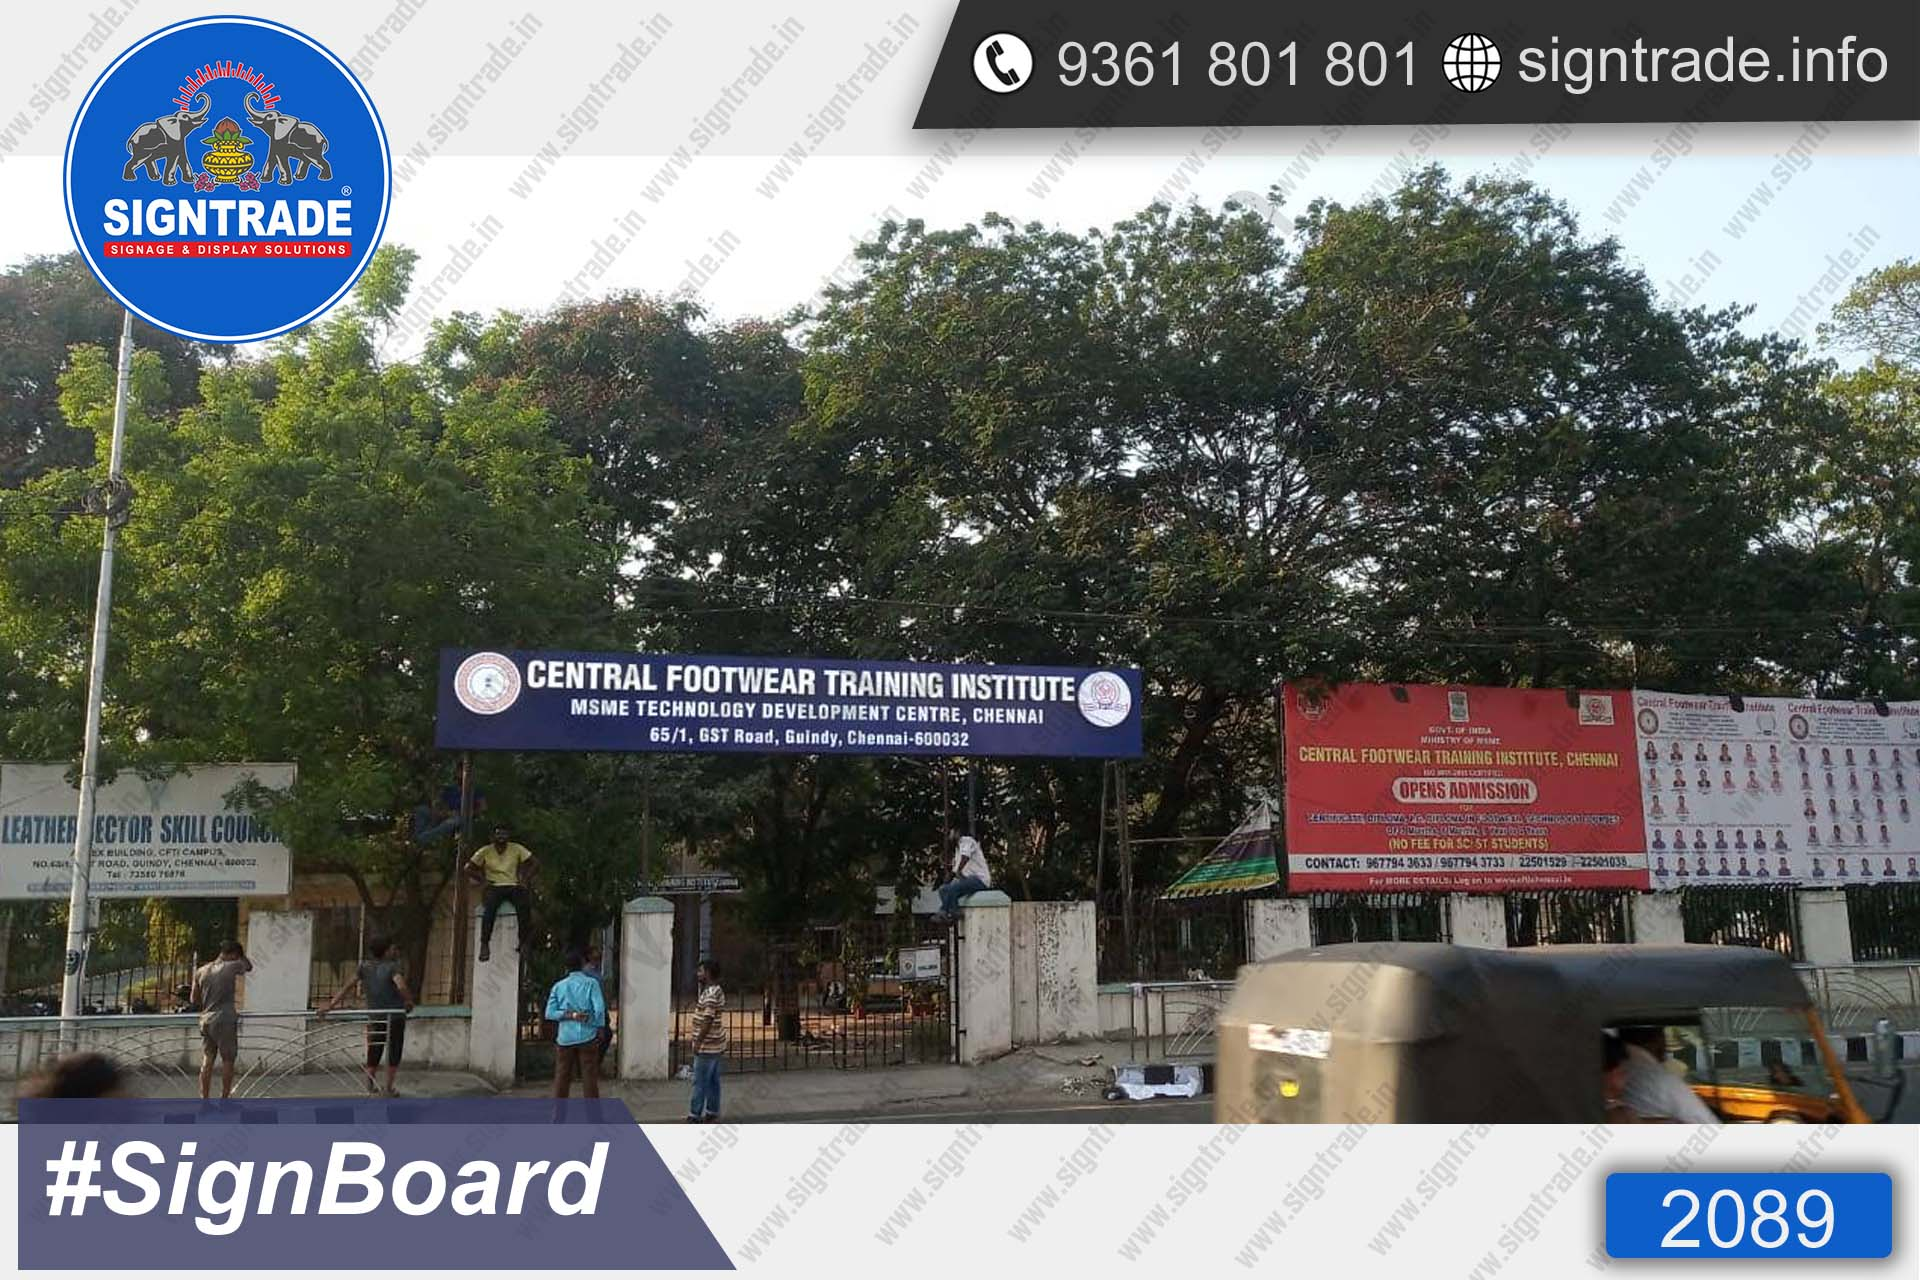 Central Footwear Training Institute Sign Board